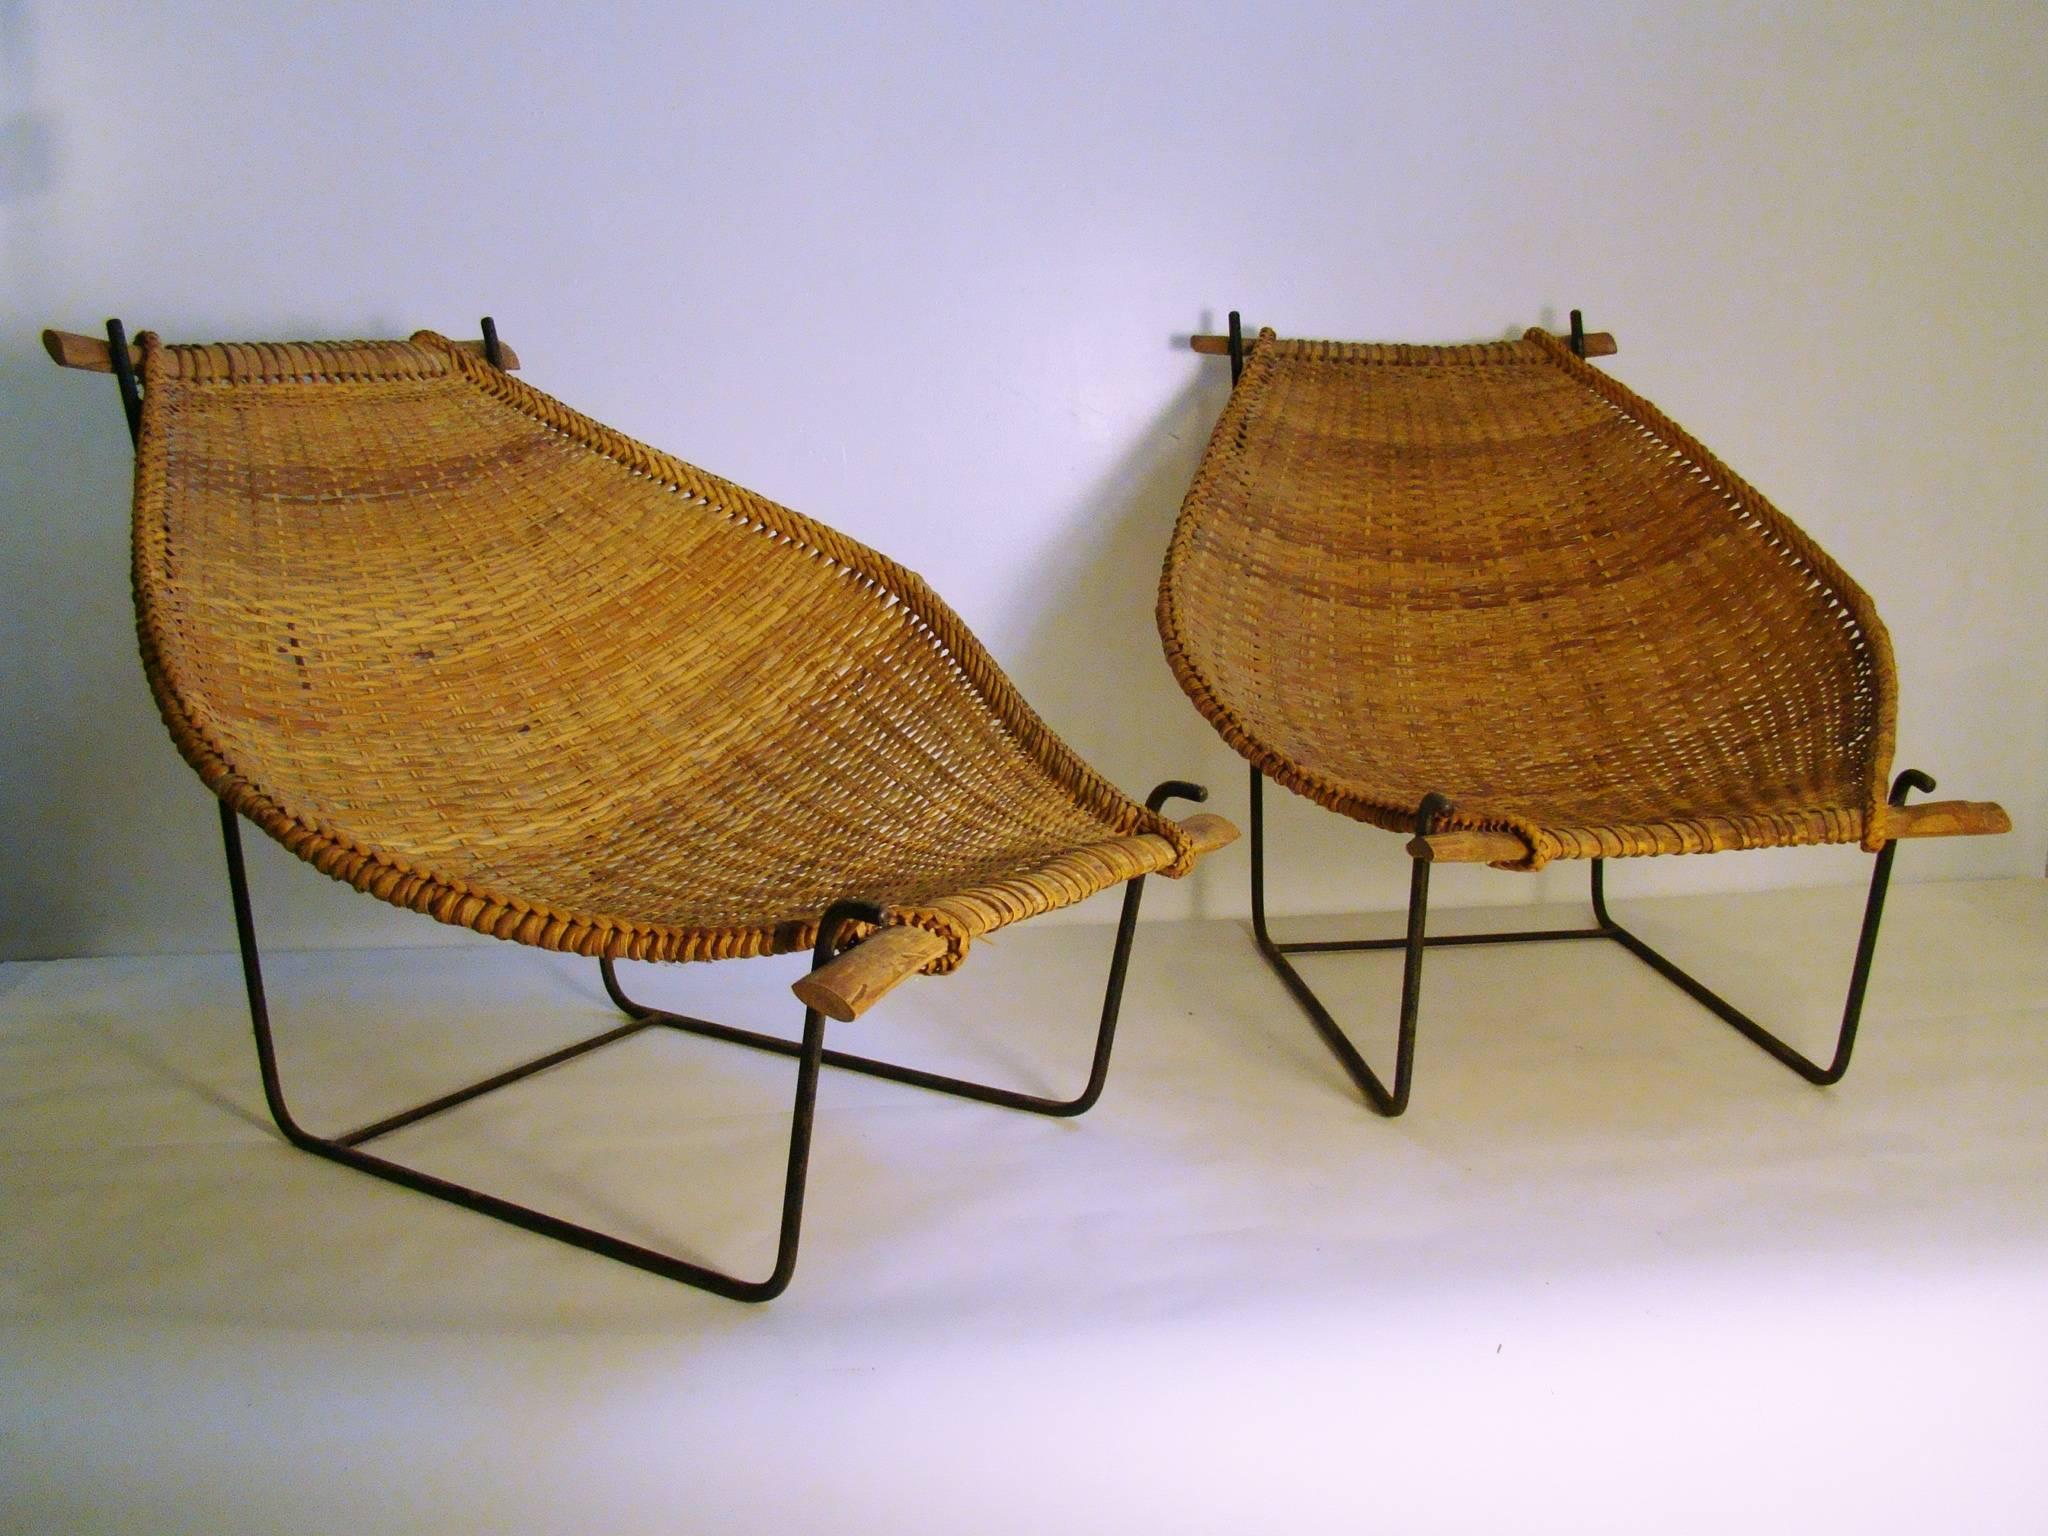 Beautiful Rattan and Wrought Iron bamboo sling lounge chair on a sled base, circa 1960s. So comfortable, before you know it, you'll be California dreaming'! The bamboo sling sits on the frame and is easily removable for storage in colder climates.